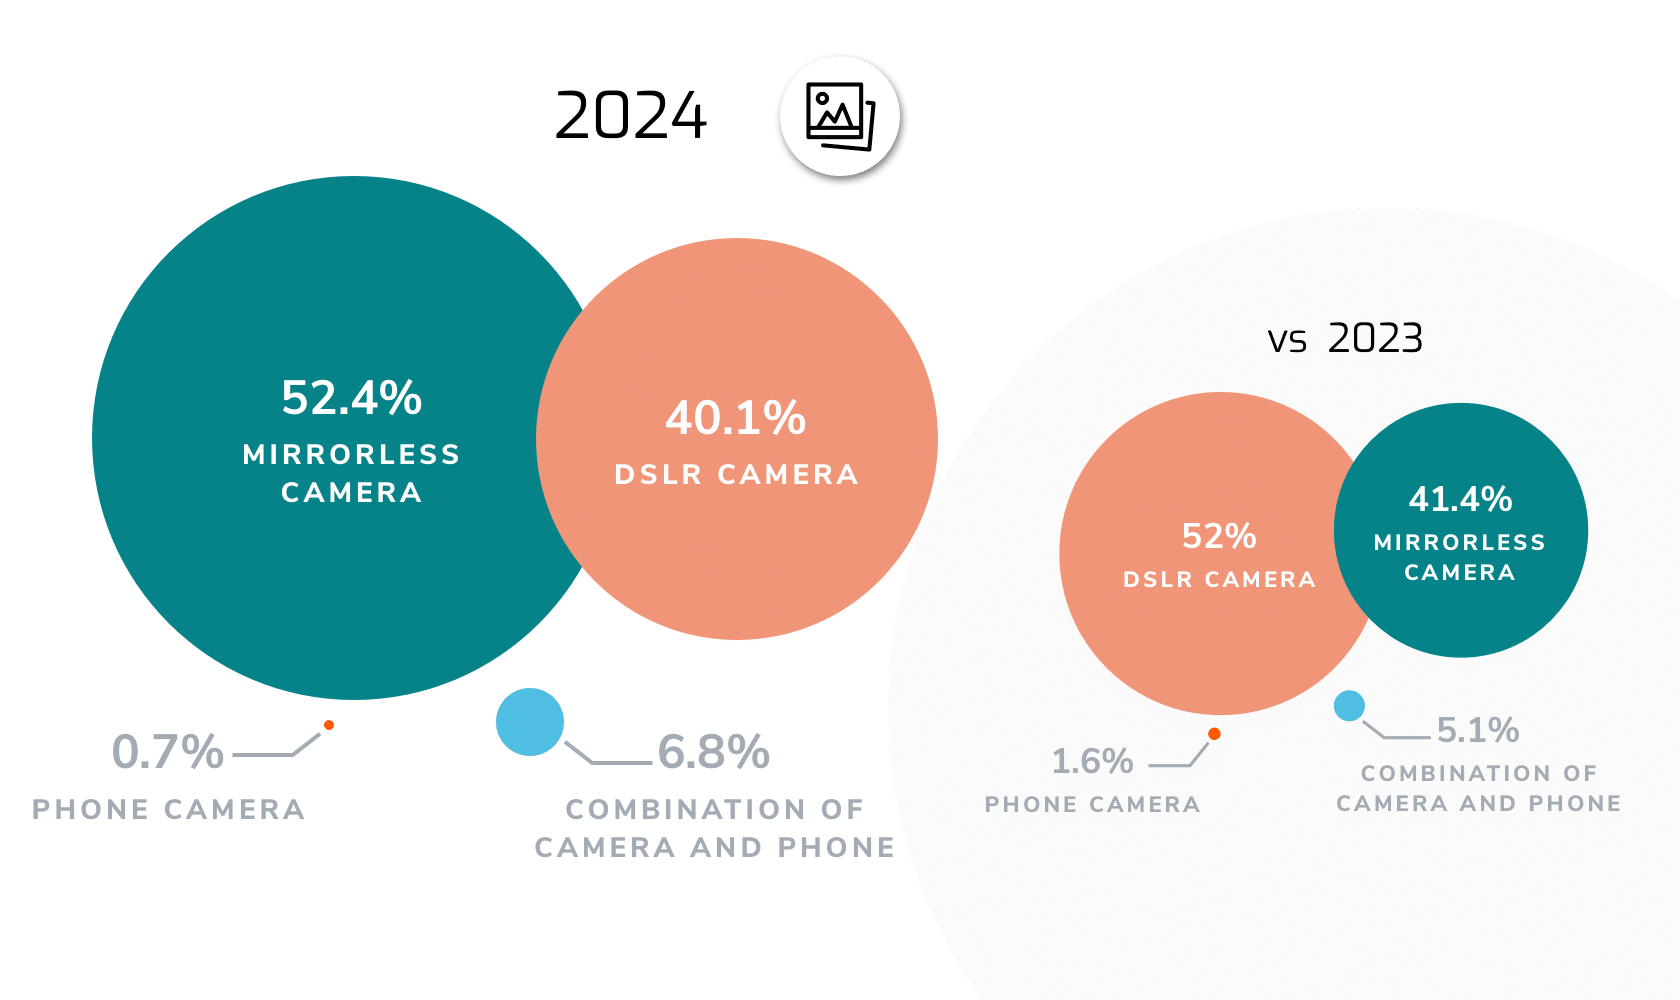 graphic showing the gear preferences  by percentage for mirrorless cameras over dslr cameras in 2024 vs the preference for dslr cameras over mirrorless in 2023.